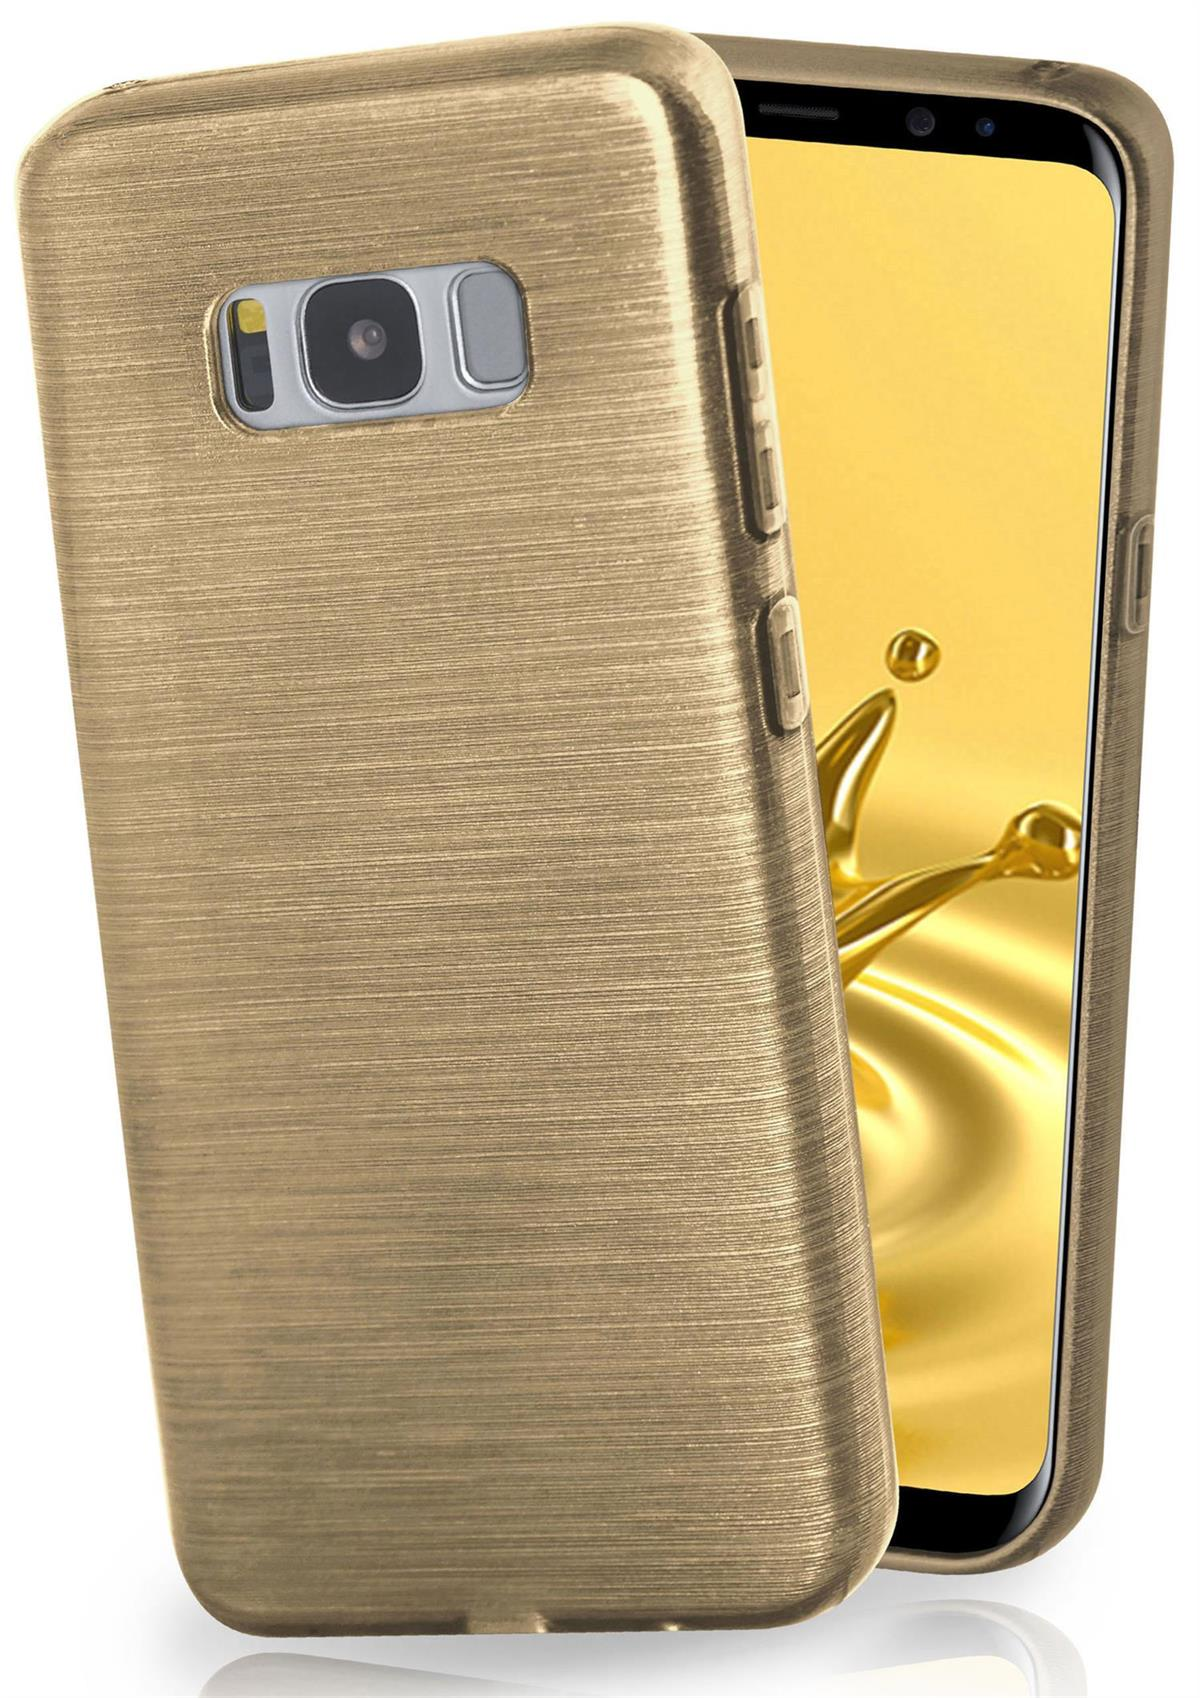 Brushed Backcover, Galaxy Samsung, Ivory-Gold S8 Plus, MOEX Case,